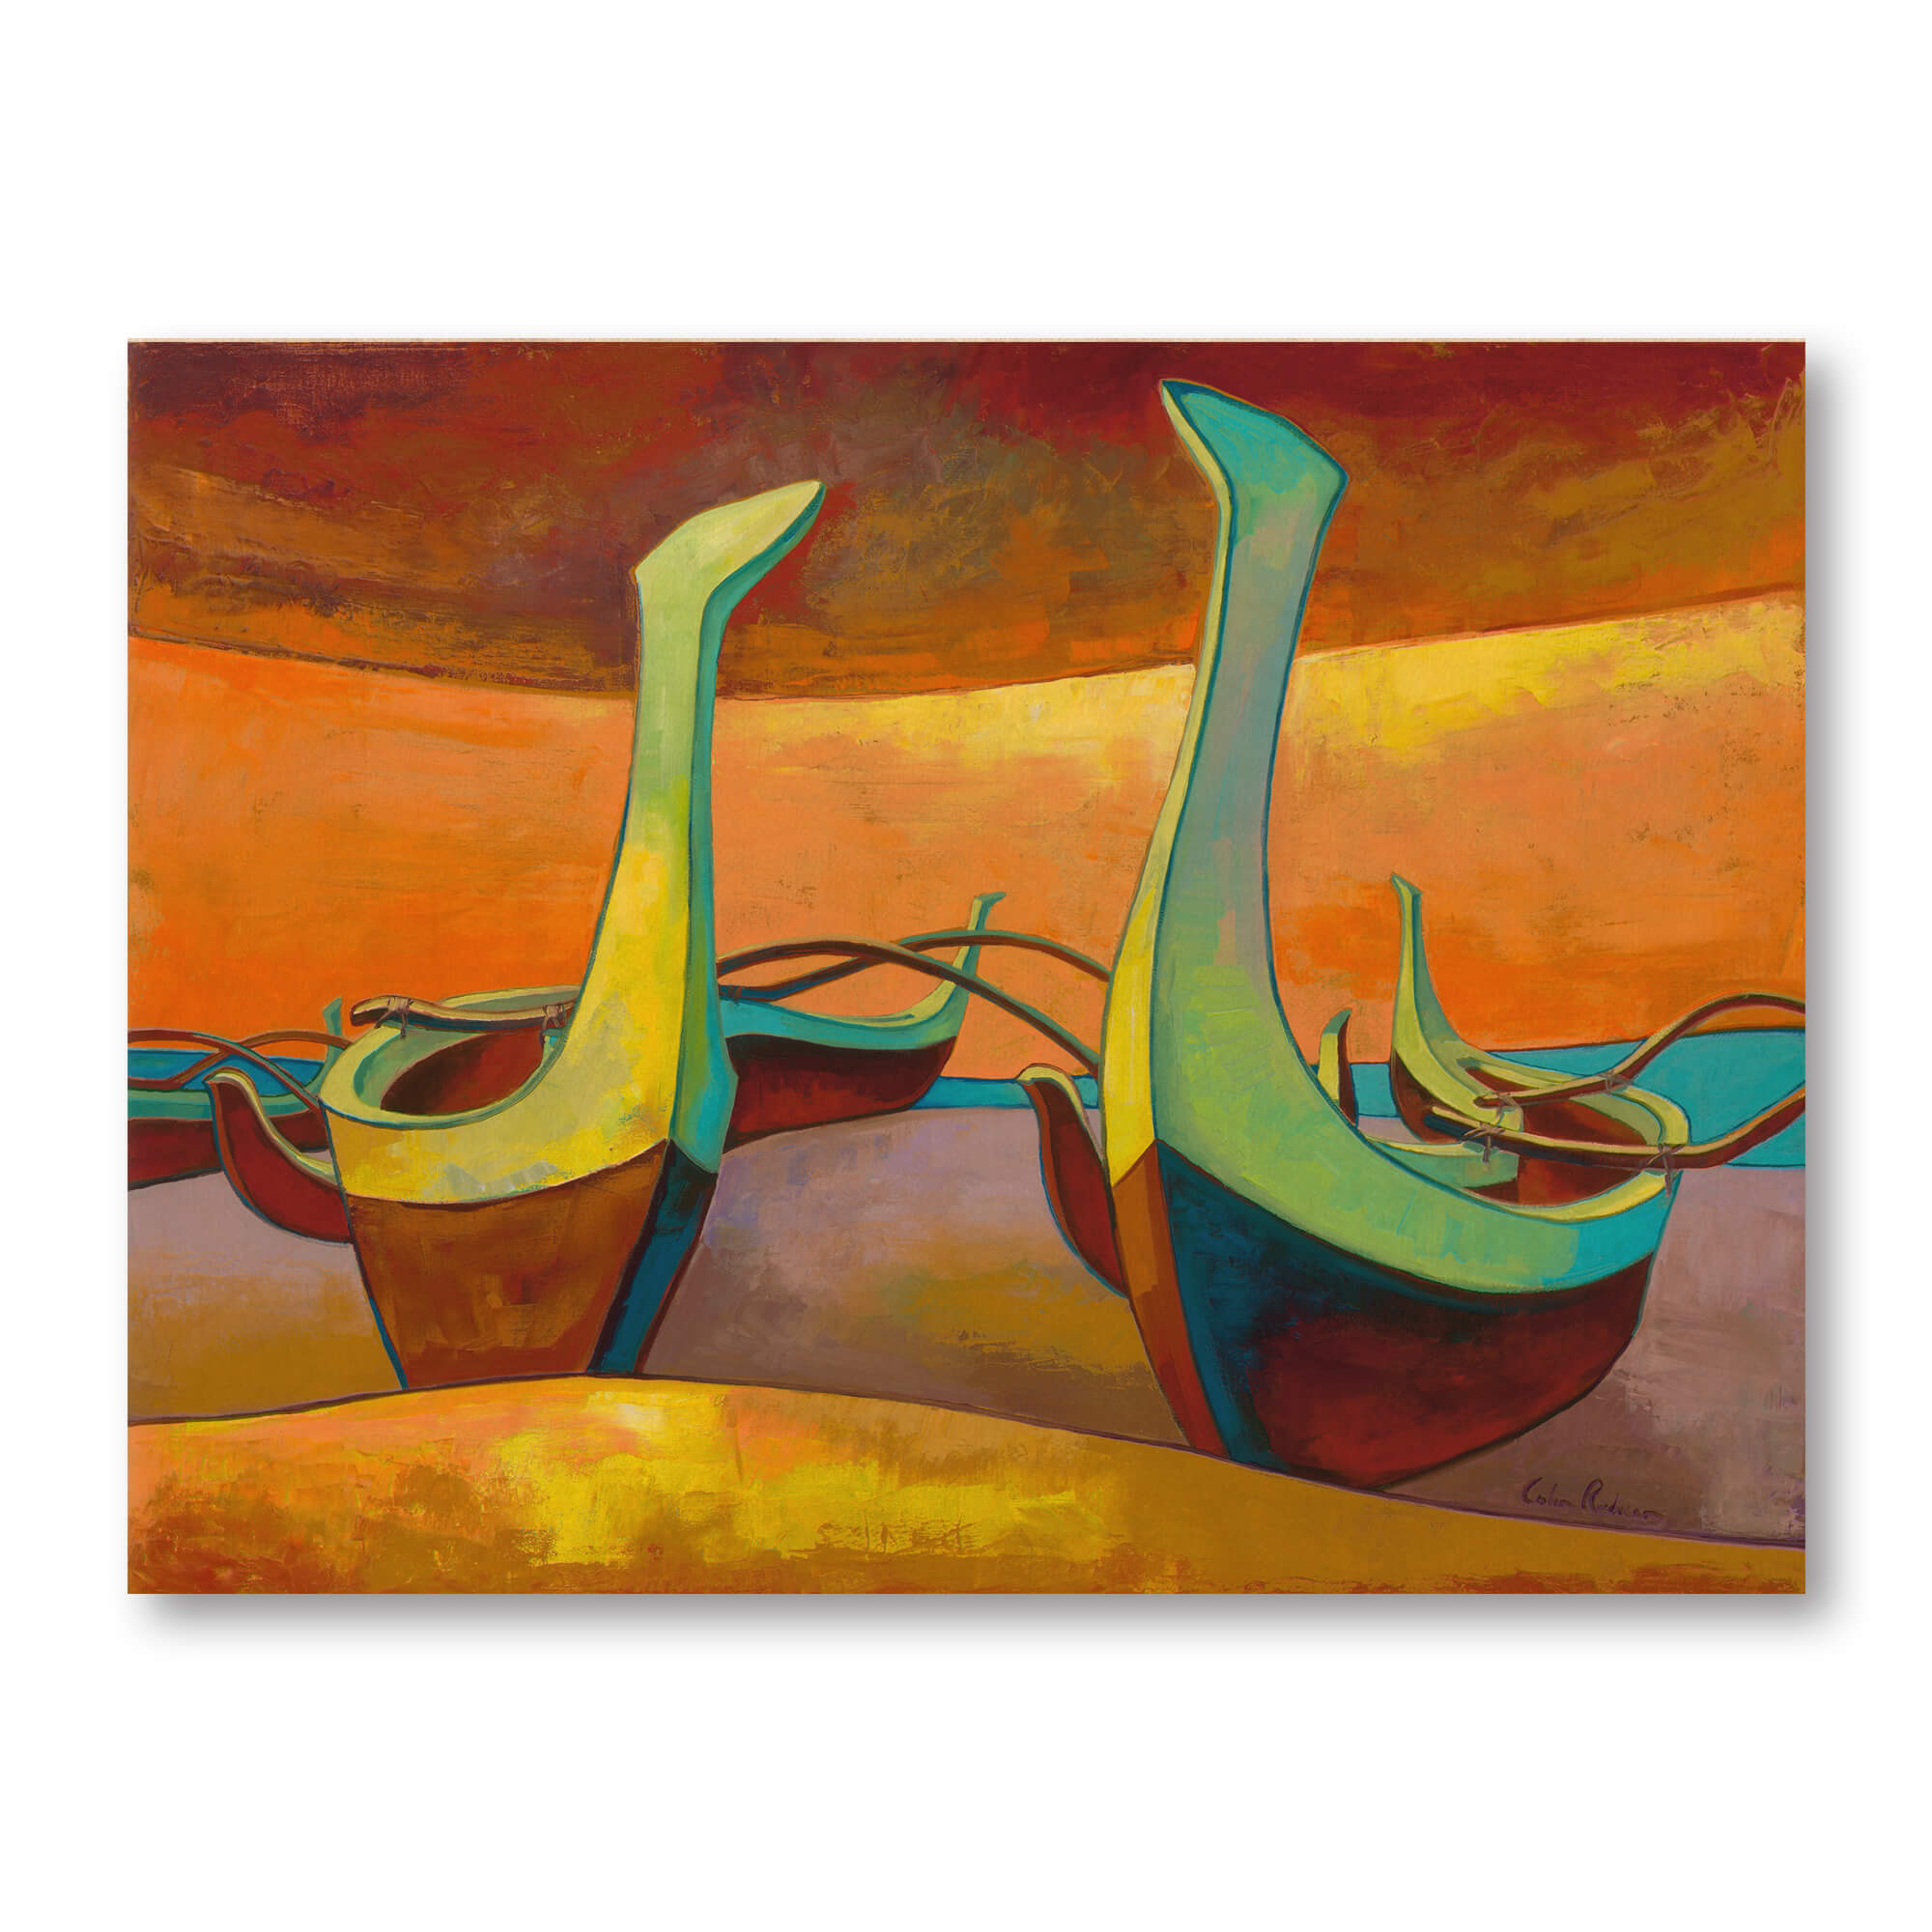 Carved canoes on the shore by Hawaii artist Colin Redican